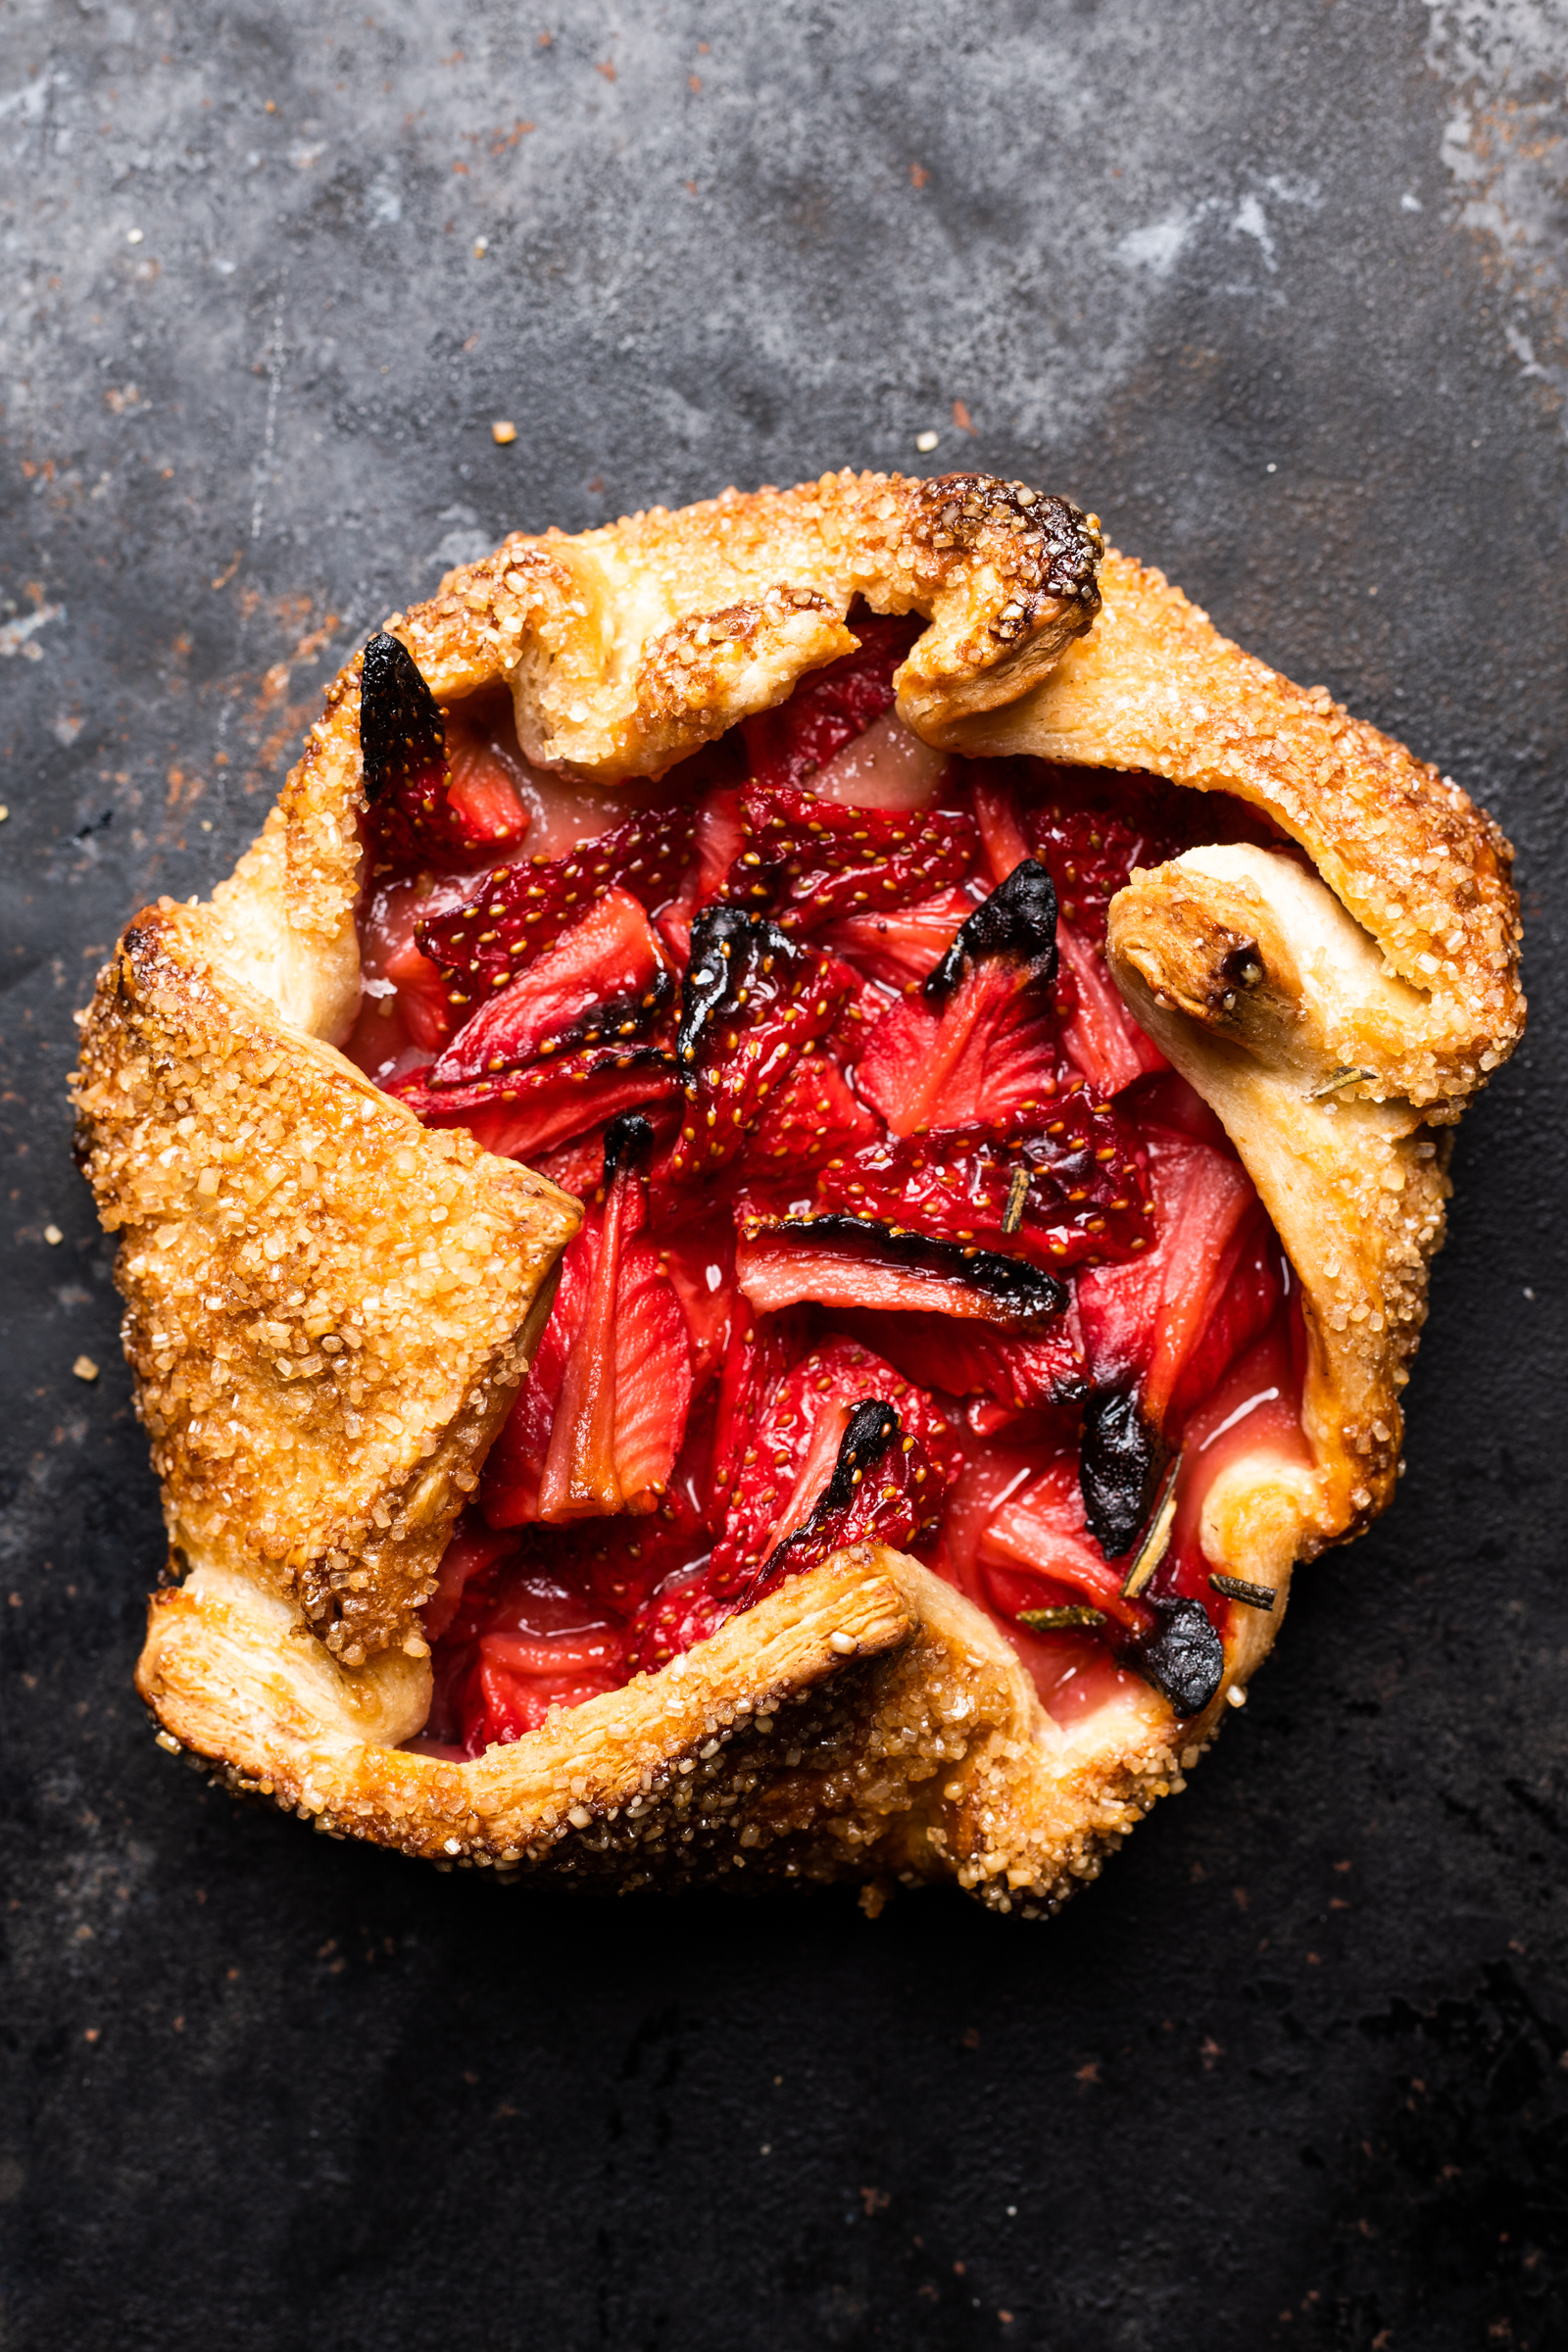 A strawberry galette from Levee Baking Co